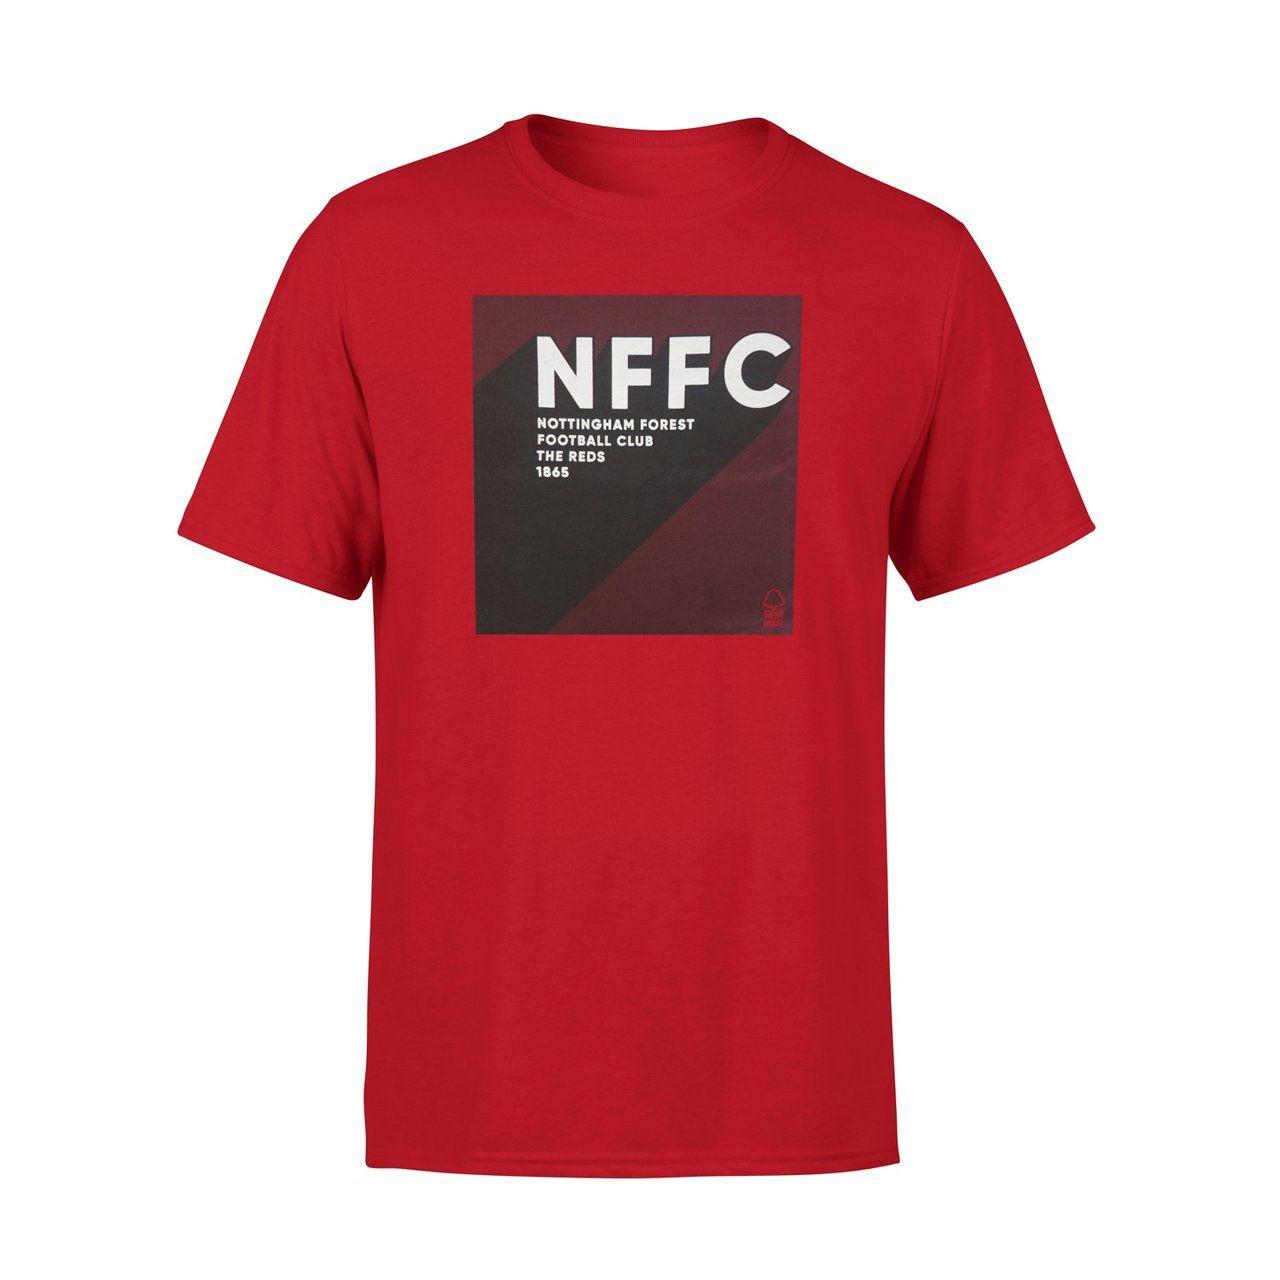 S a Red Square Logo - NFFC Junior Red Square T-Shirt – Nottingham Forest Megastore